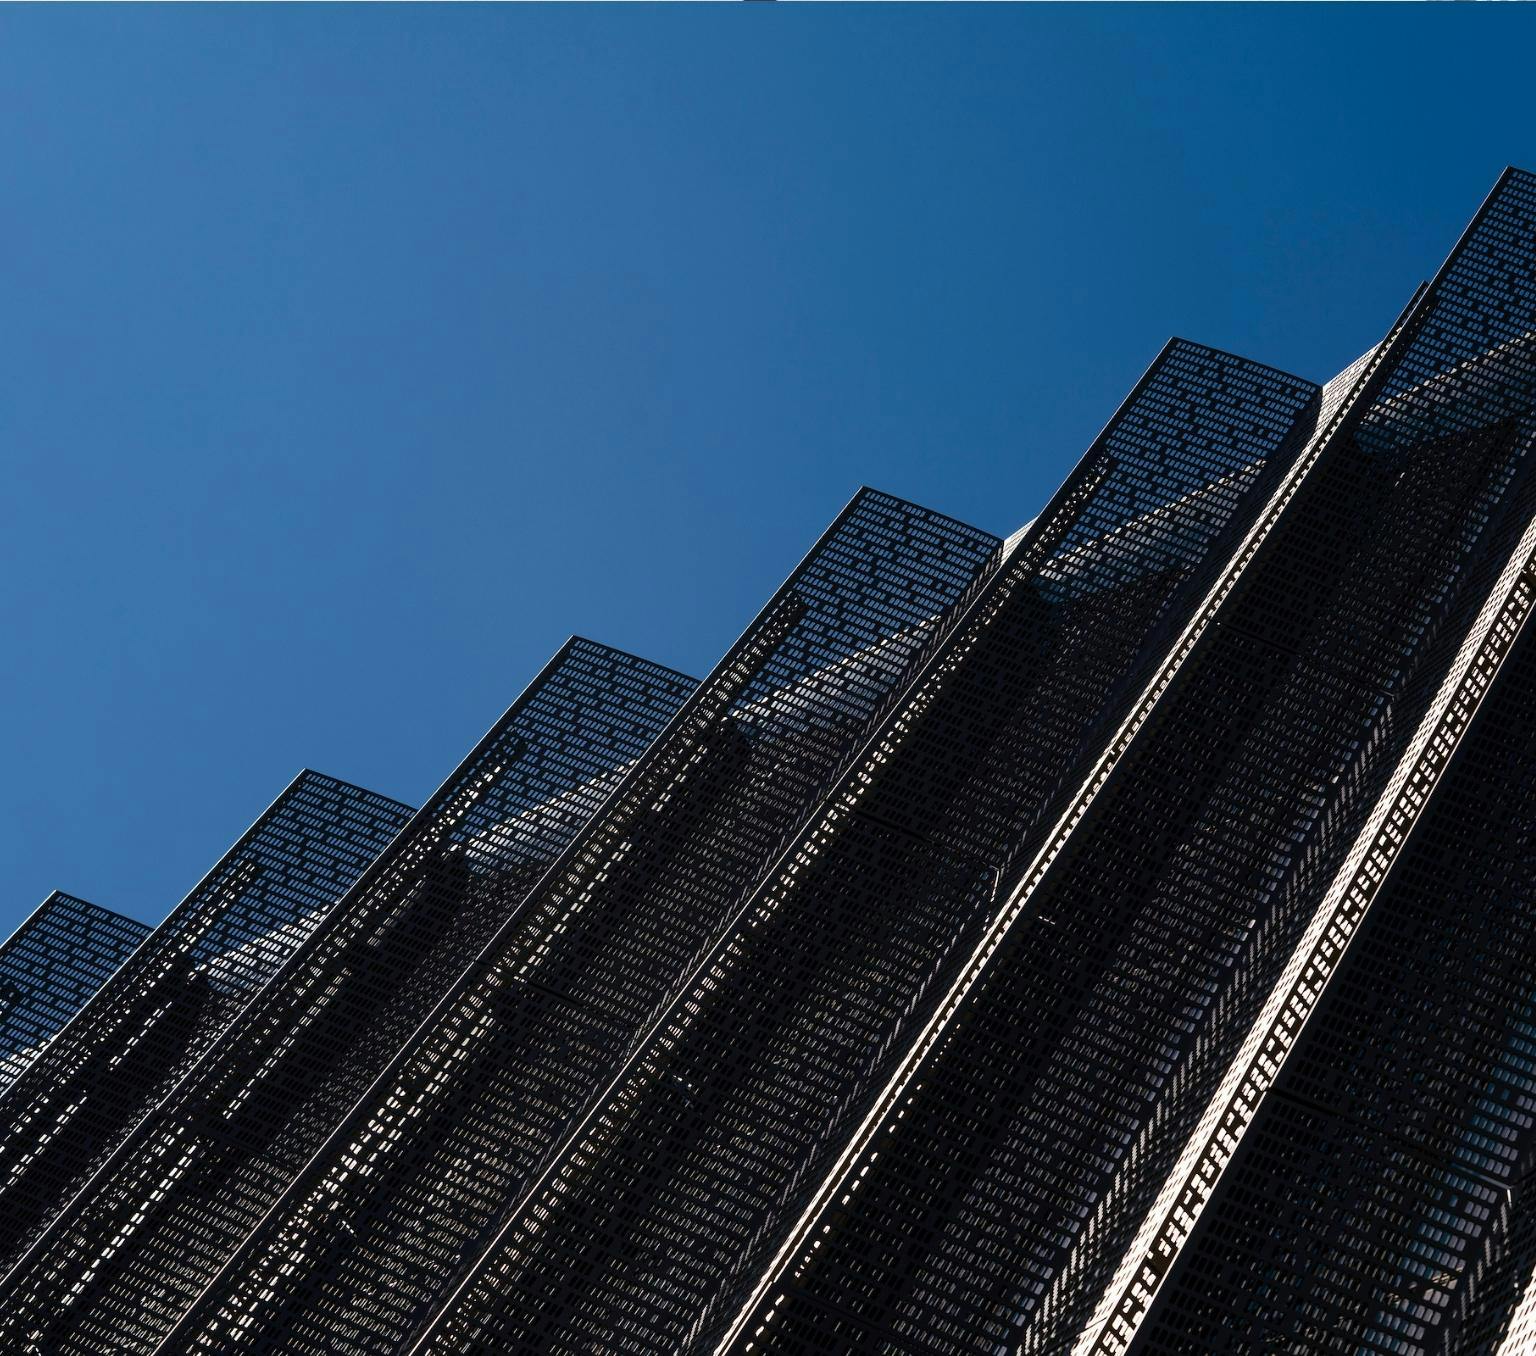 mesh panels on a building with a bright blue sky behind